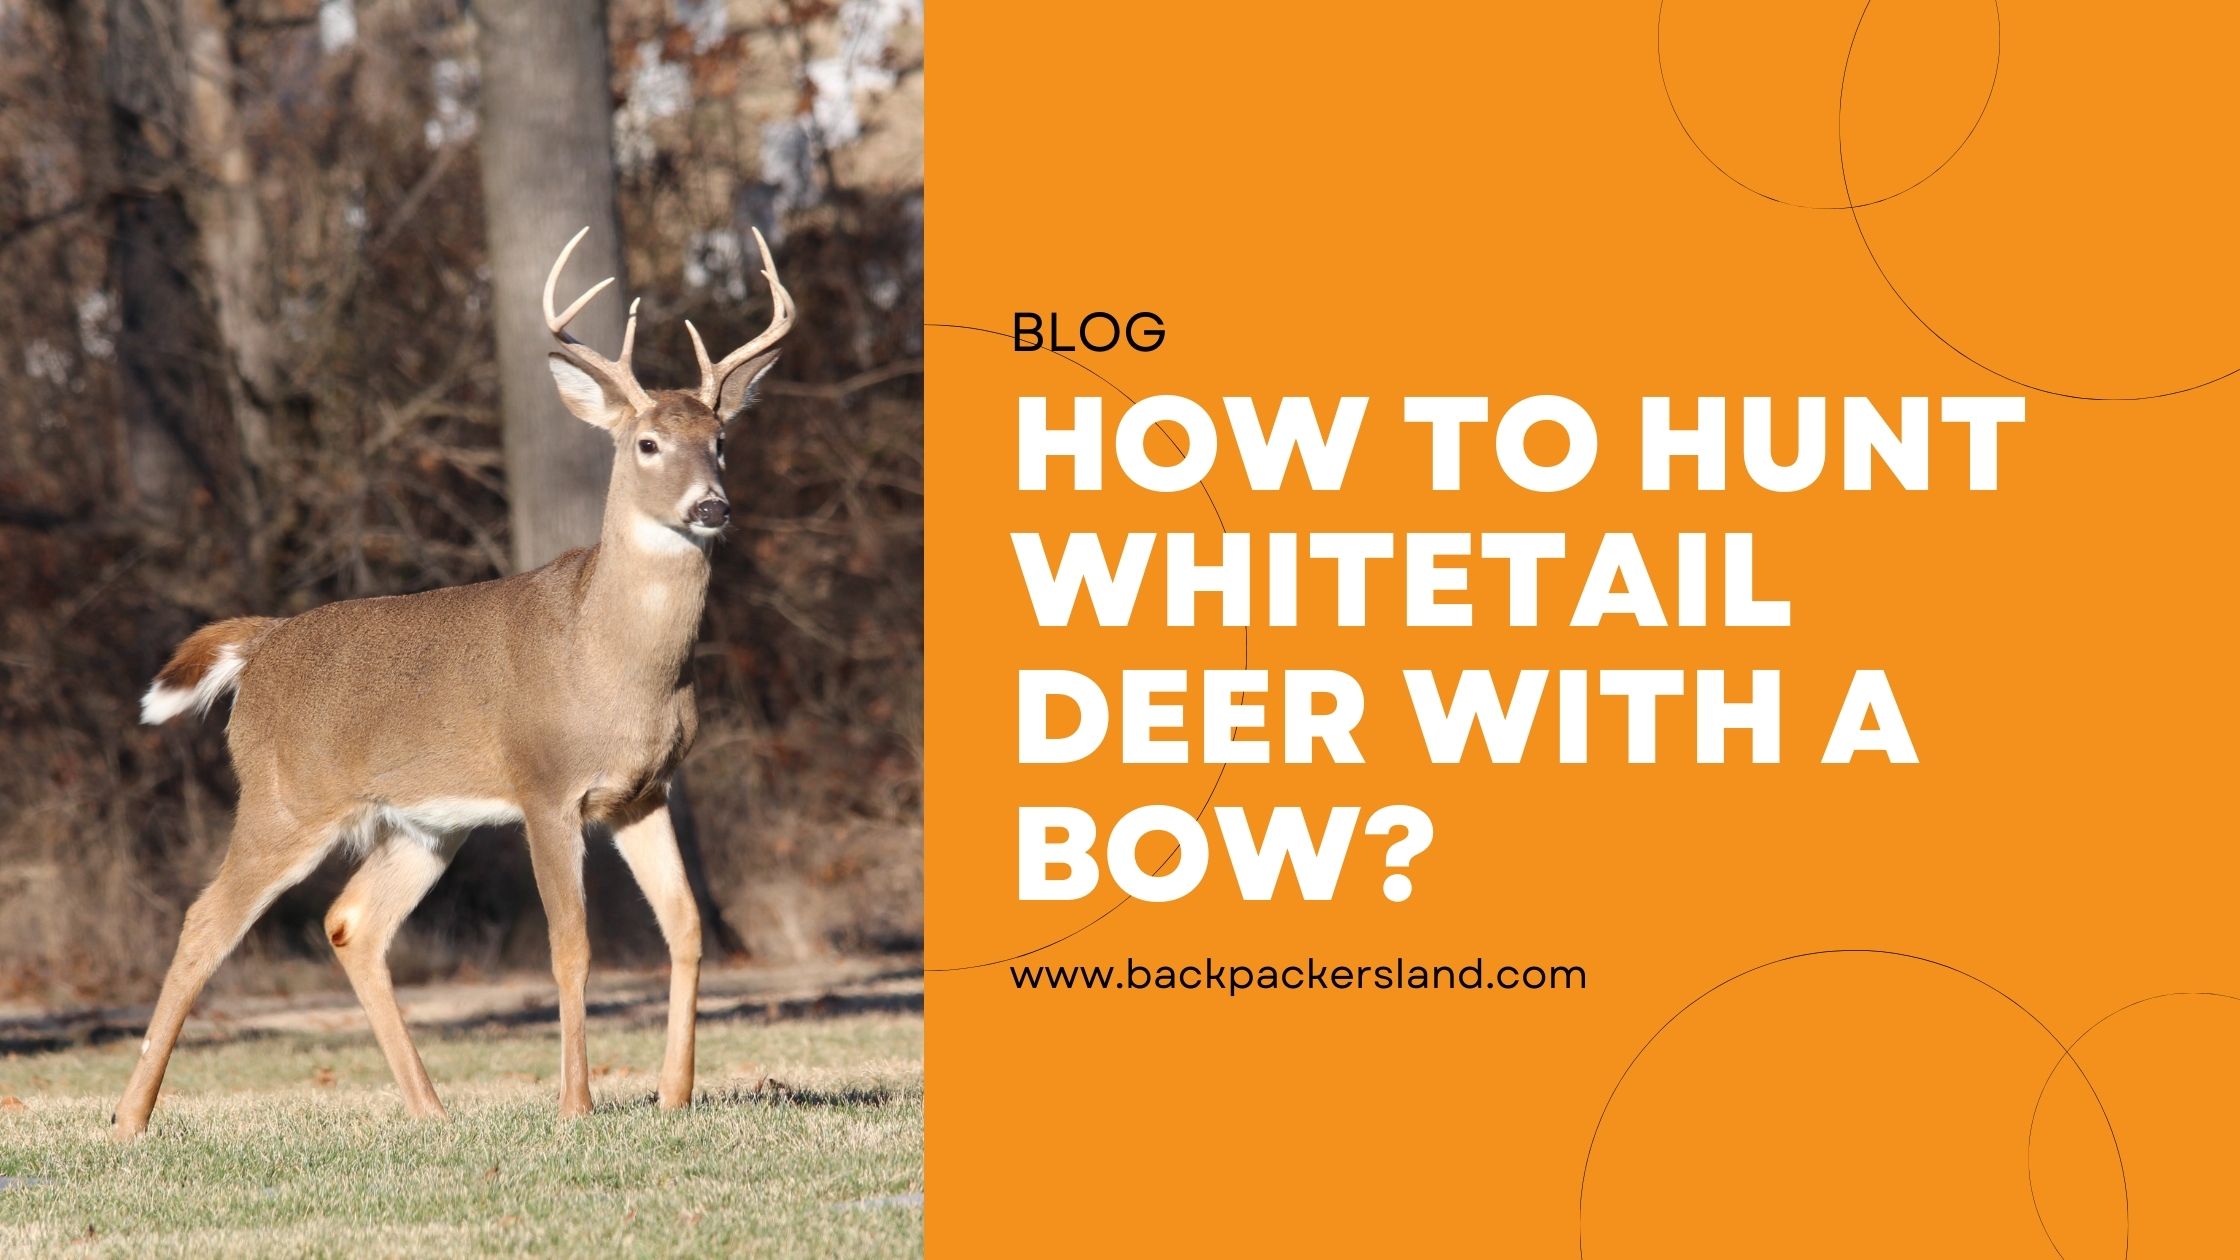 How To Hunt Whitetail Deer With A Bow